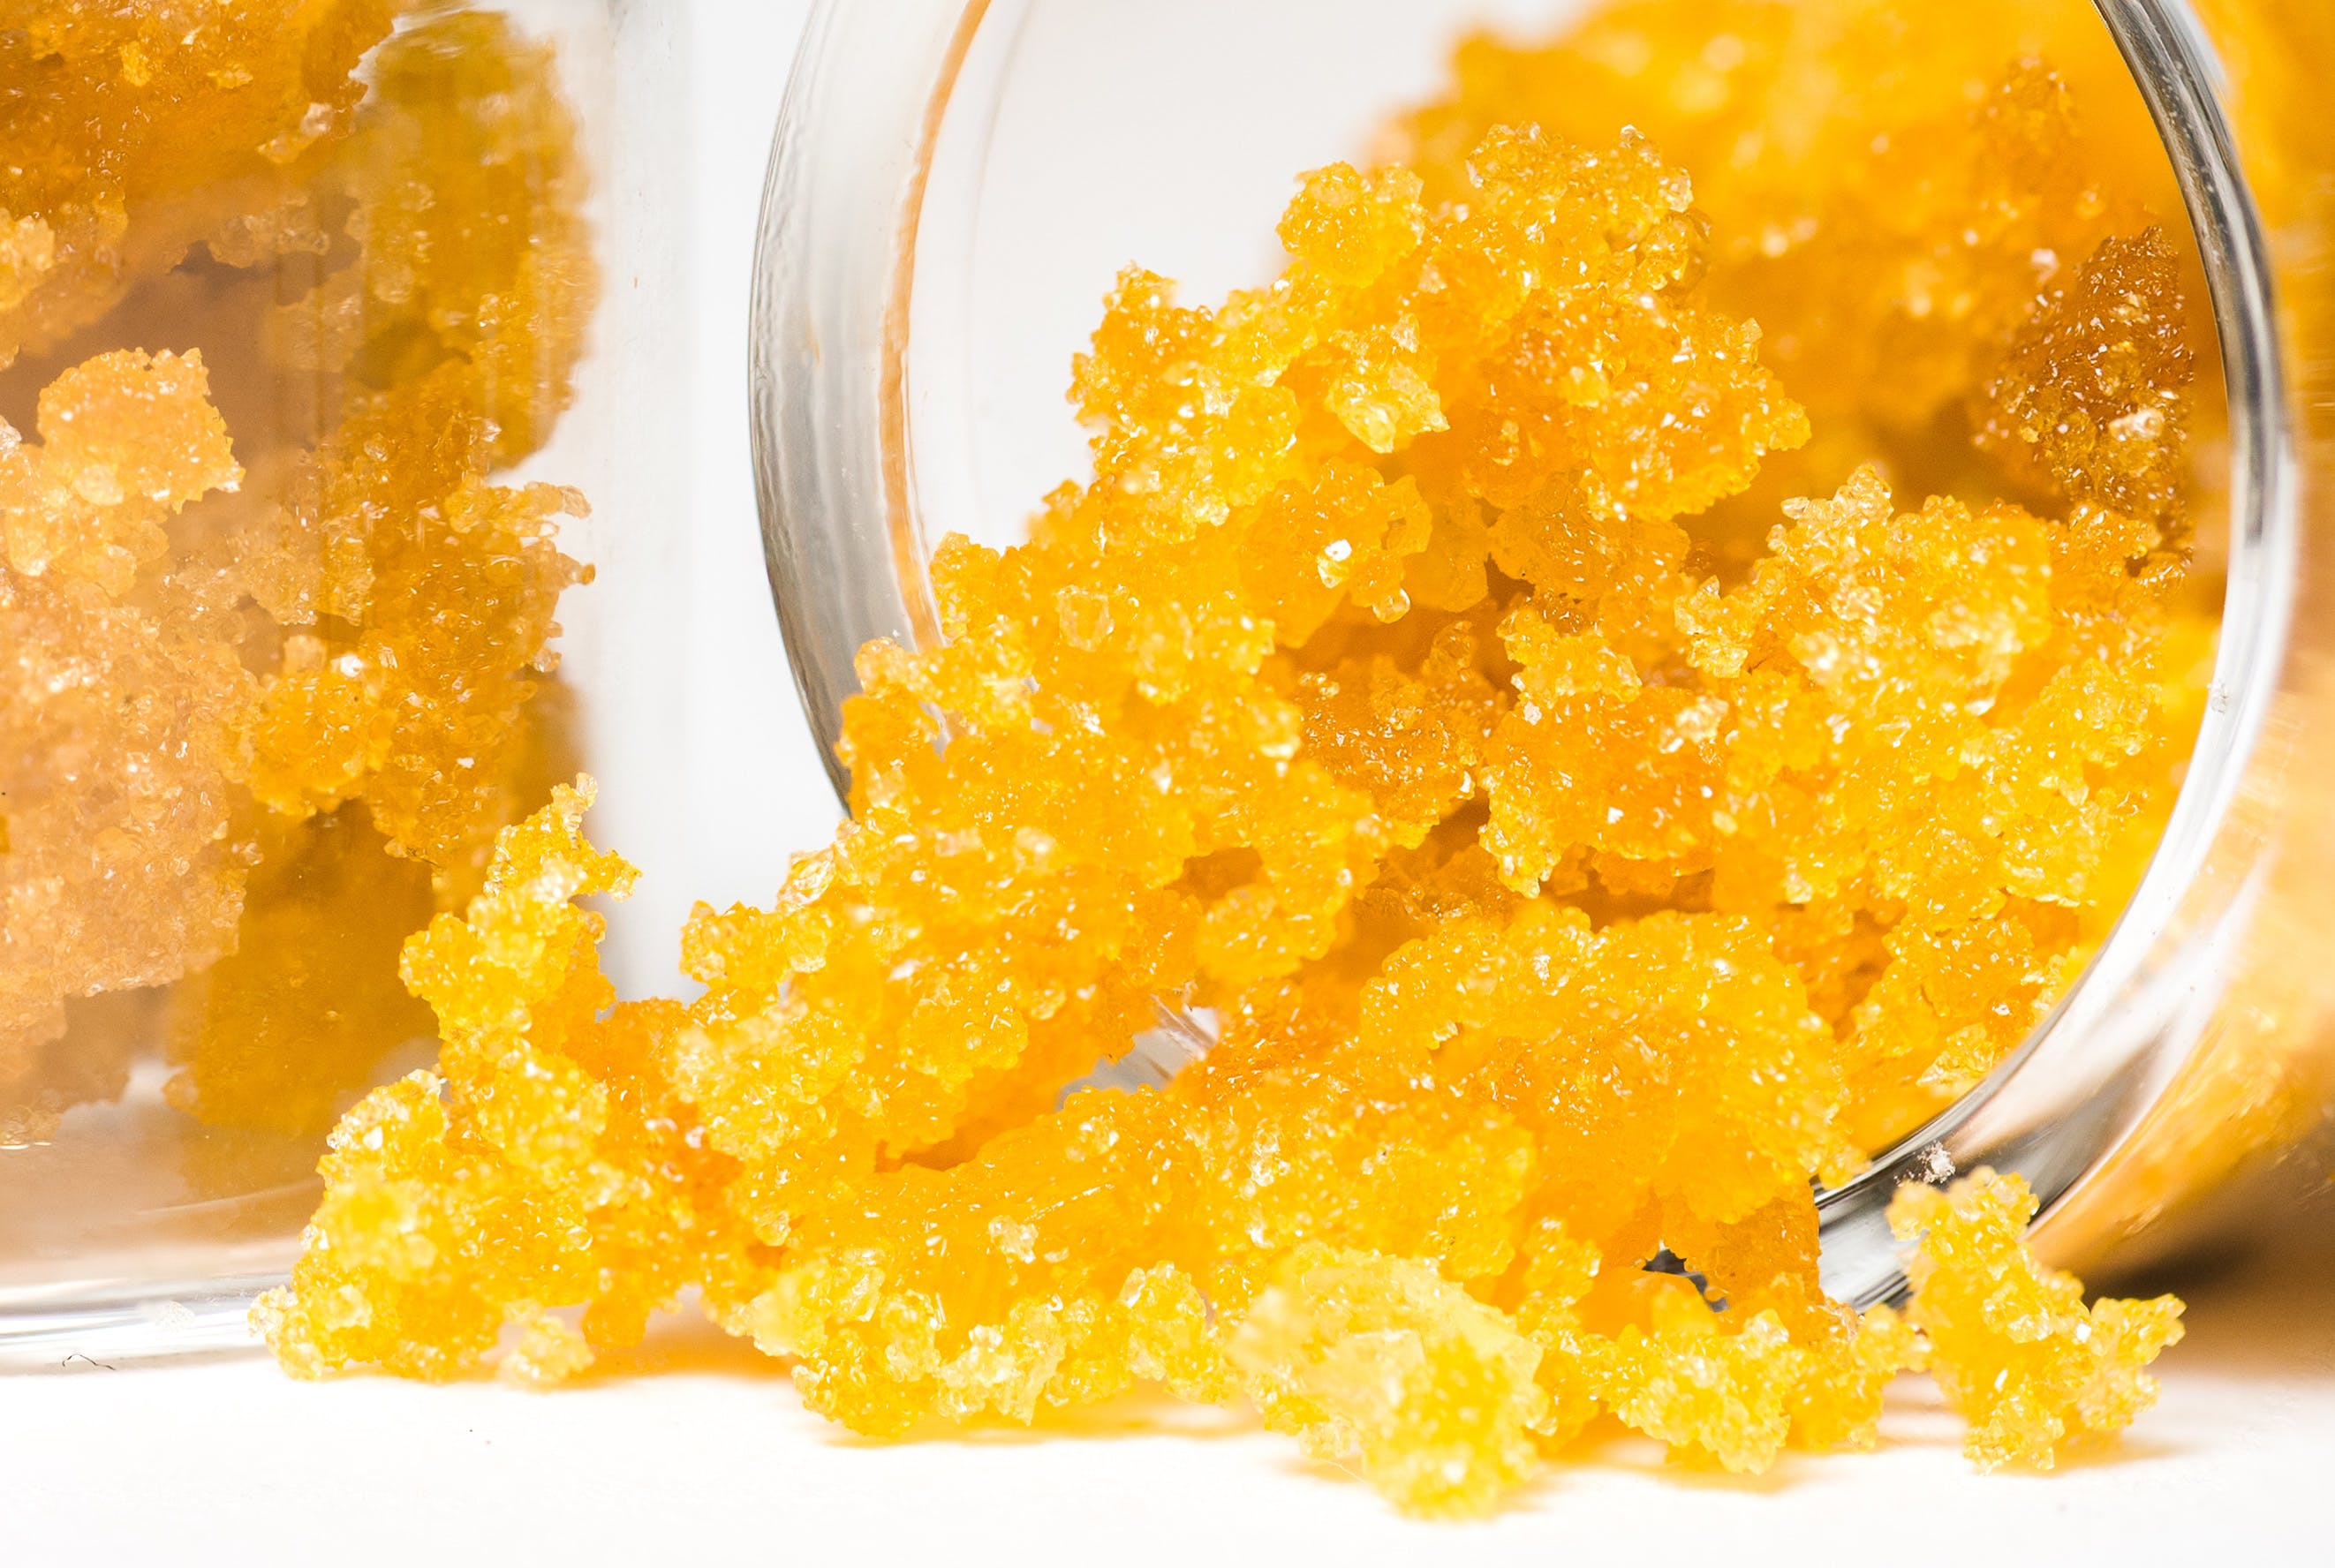 concentrate-firebrand-candyland-diamond-resin